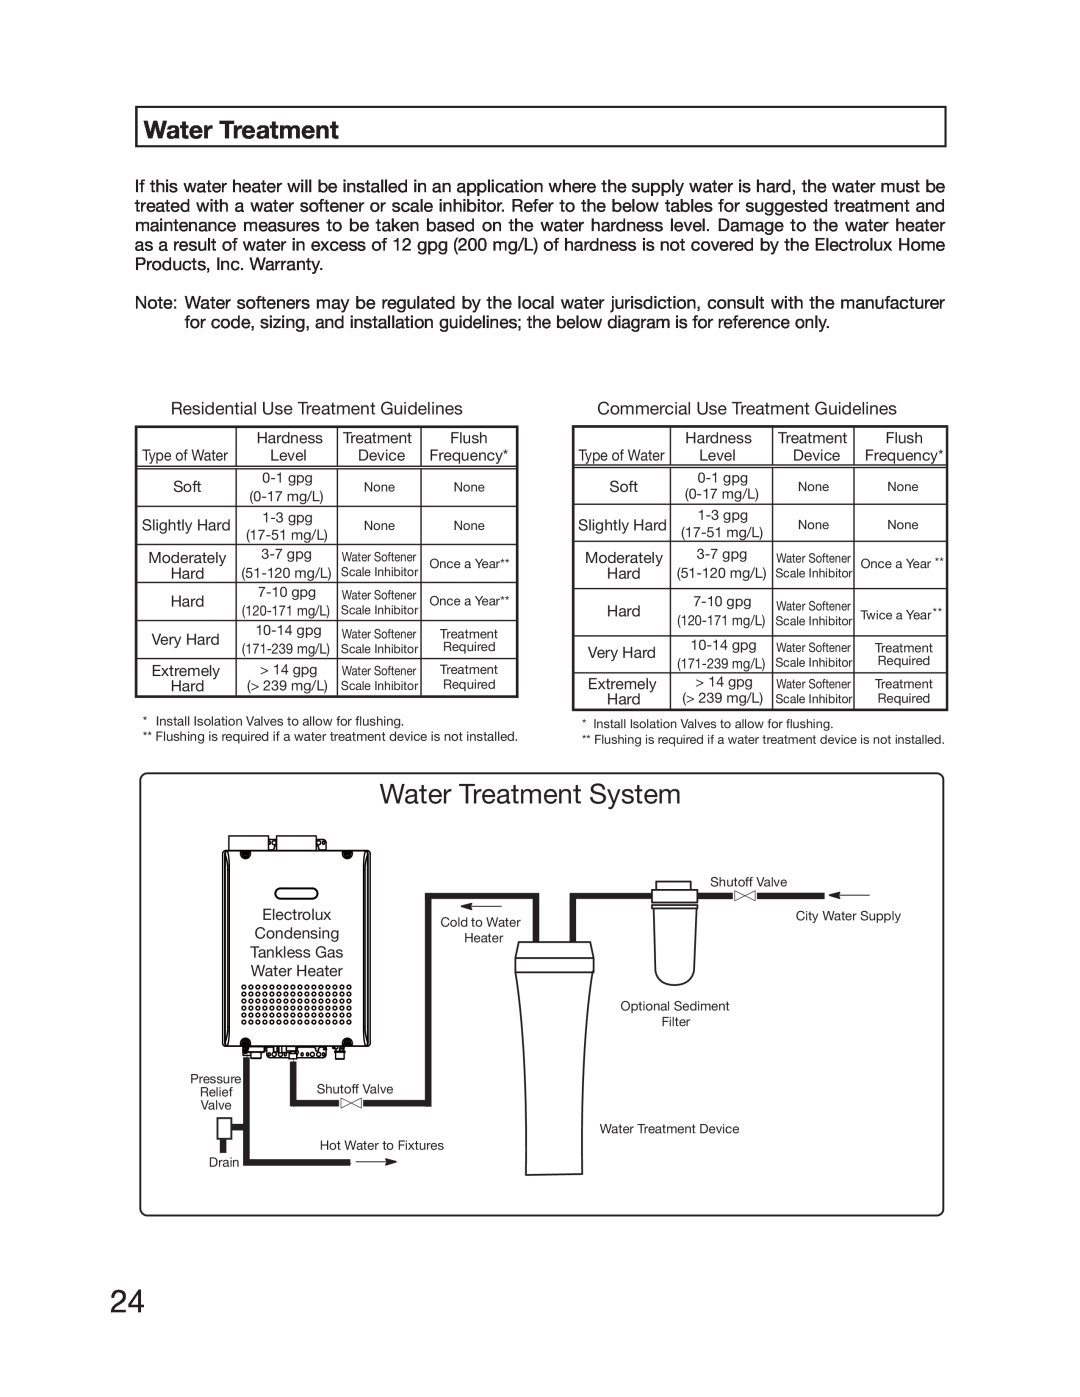 Electrolux 5995615357 Water Treatment System, Residential Use Treatment Guidelines, Commercial Use Treatment Guidelines 